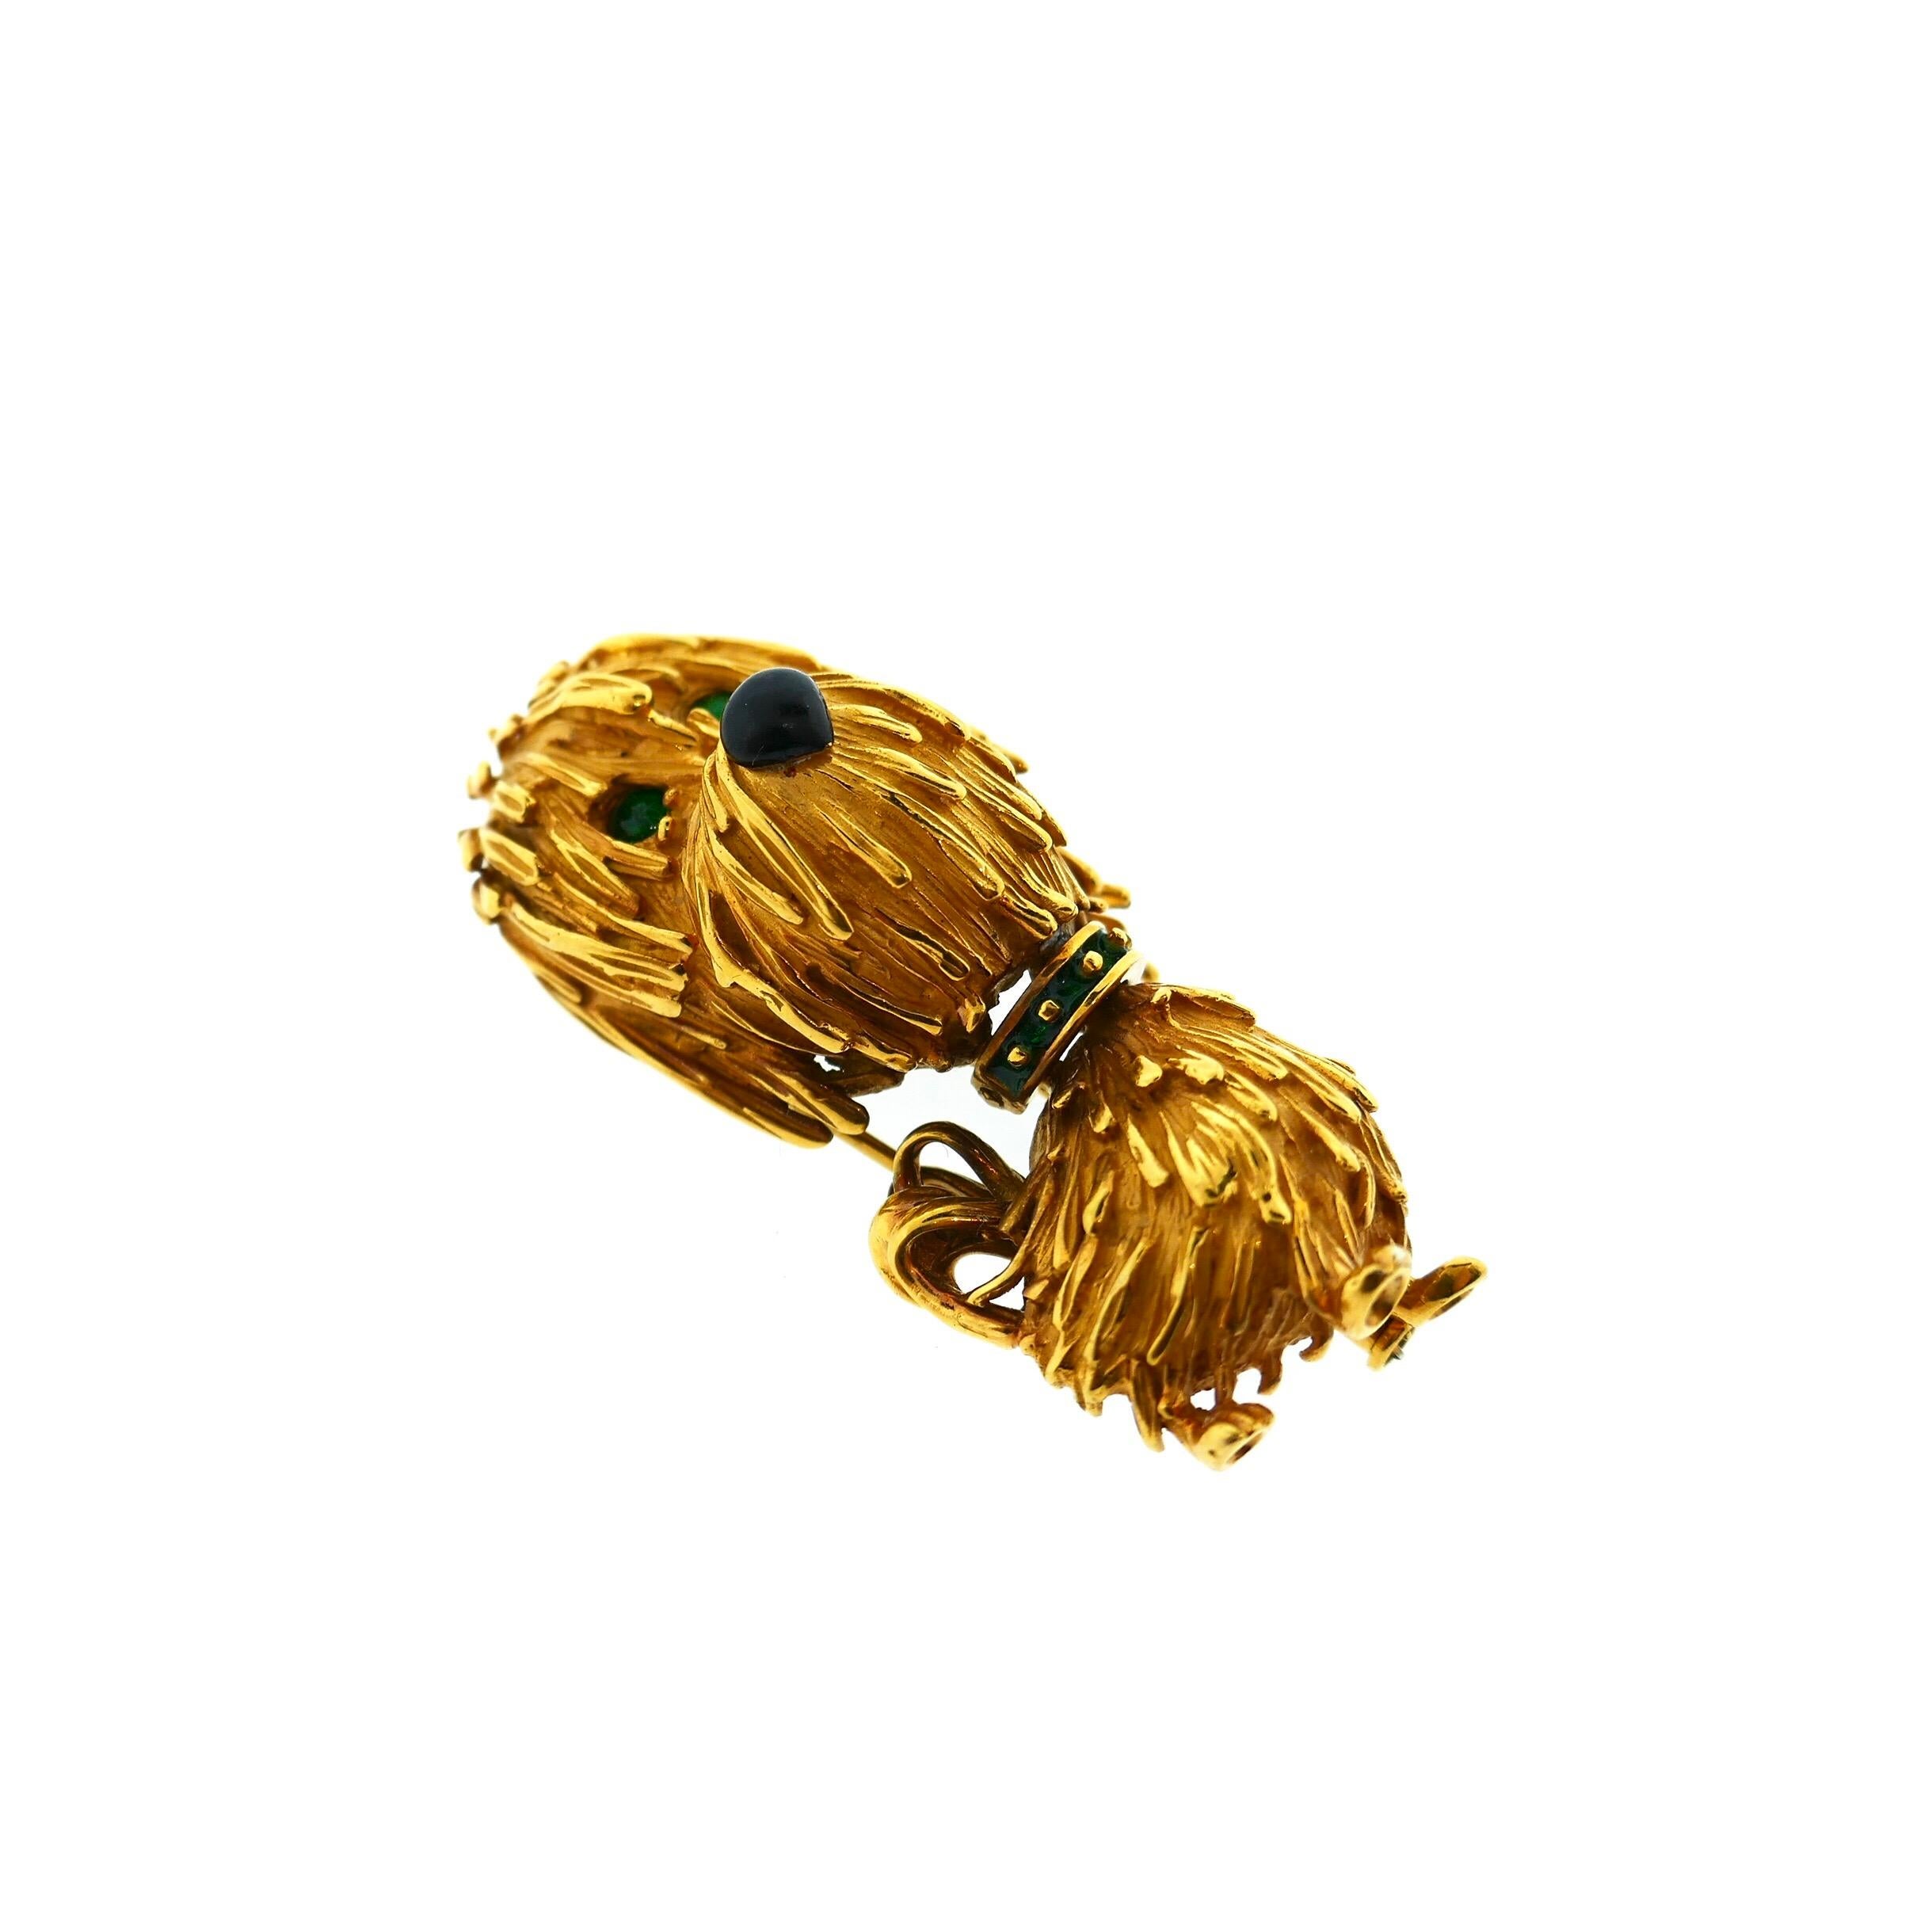 French 18 Karat Yellow Gold Enamel Onyx Dog Brooch

This brooch is made in France and is absolutely adorable.  It is crafted out of textured 18 karat yellow gold and features green enamel eyes and collar, and a black onyx nose. 

Weight: 26.8 Grams